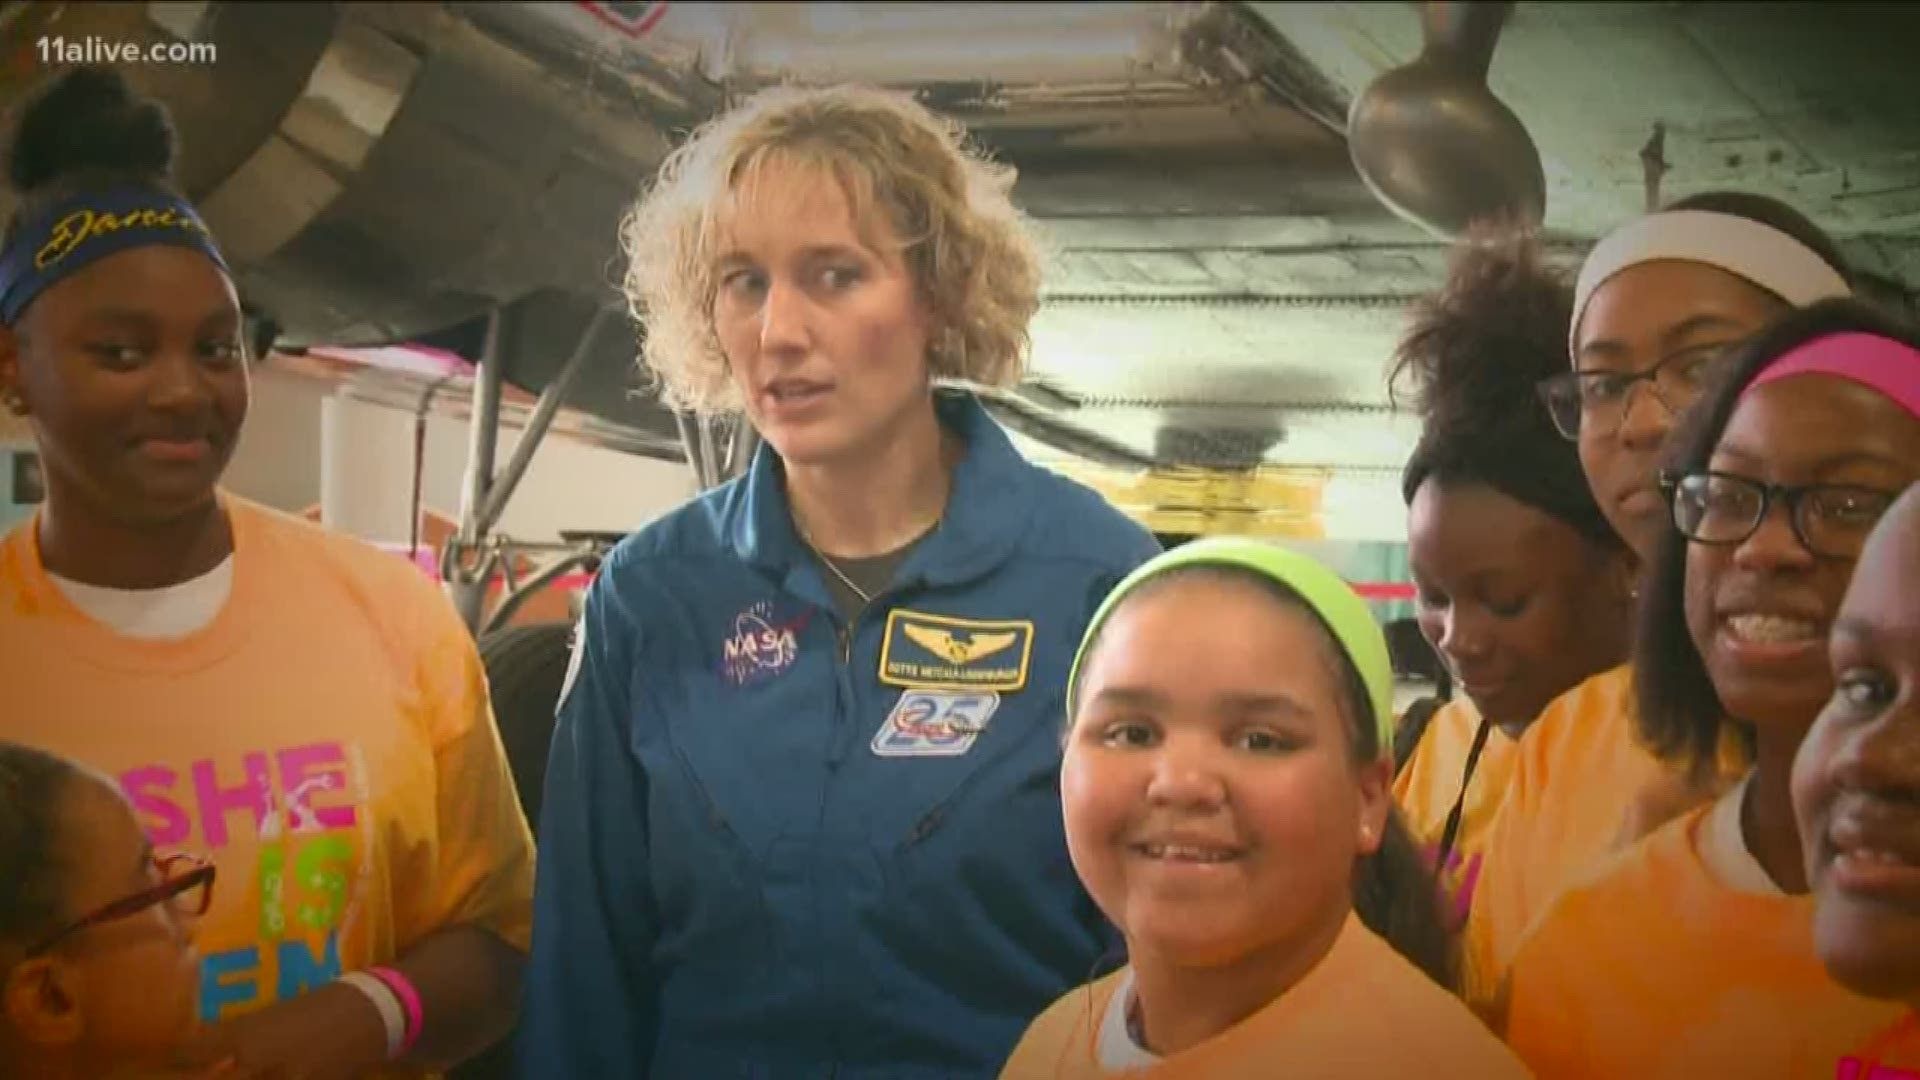 In 2010, the astronaut and former Girl Scout joined a NASA team that went to the International Space Station